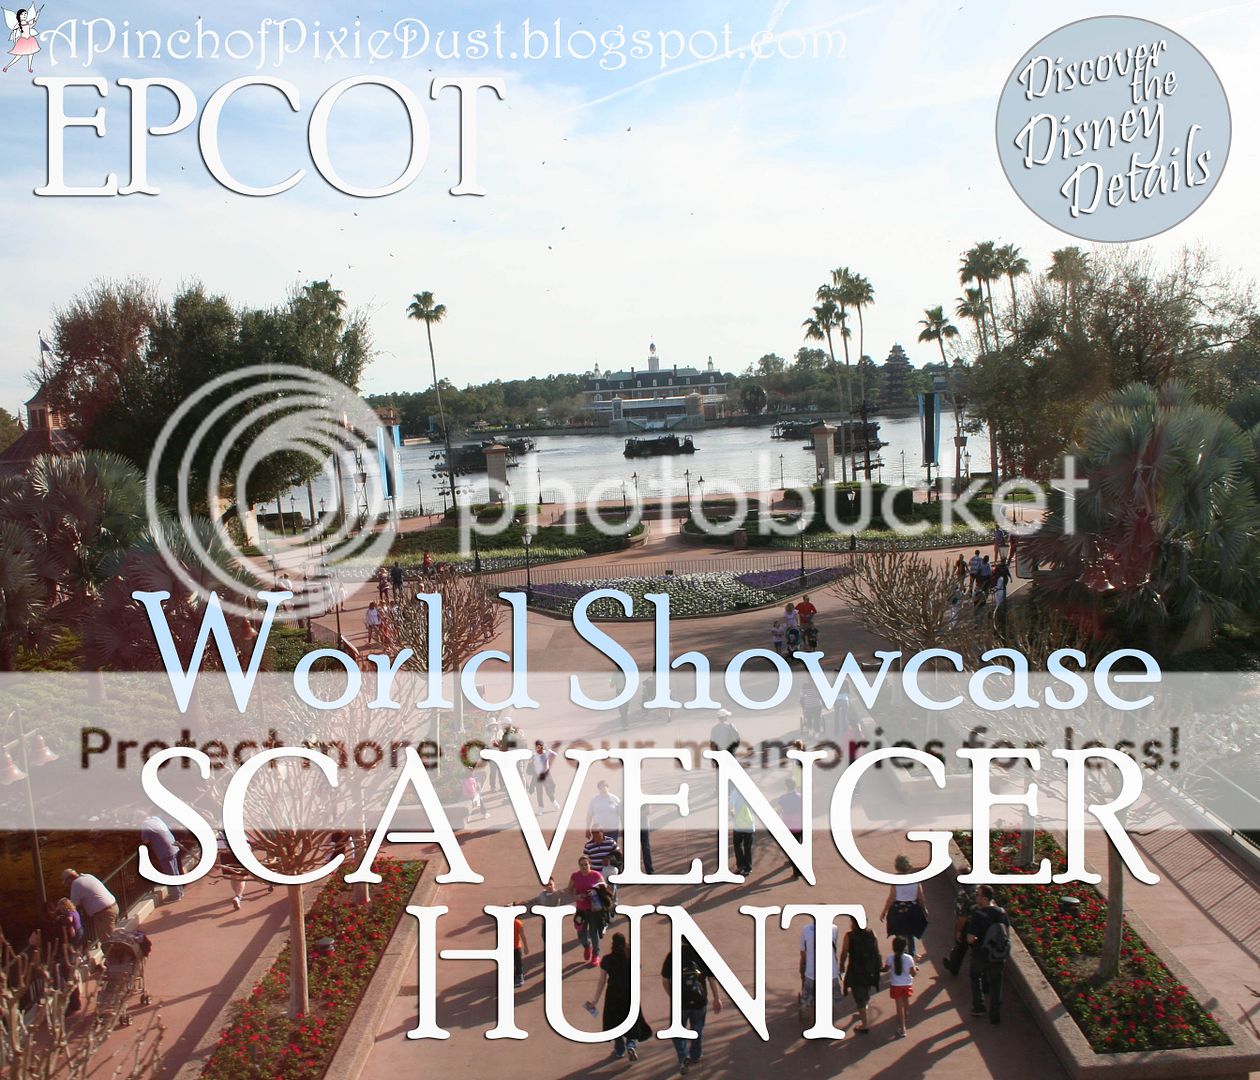 epcot scavenger hunt for adults